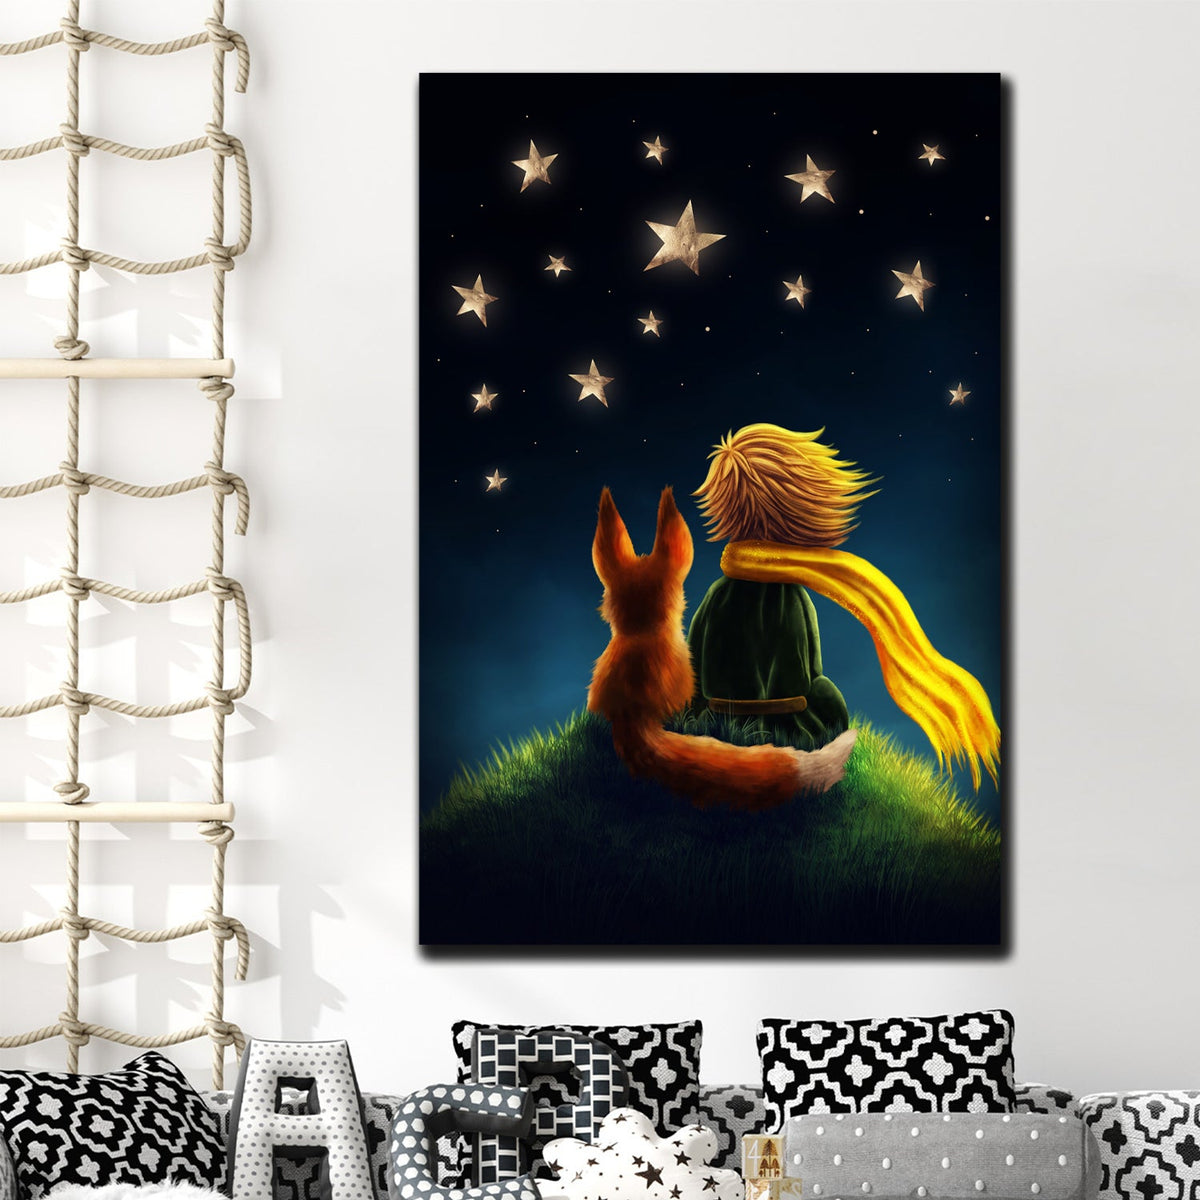 https://cdn.shopify.com/s/files/1/0387/9986/8044/products/TheLittlePrinceCanvasArtprintStretched-1.jpg